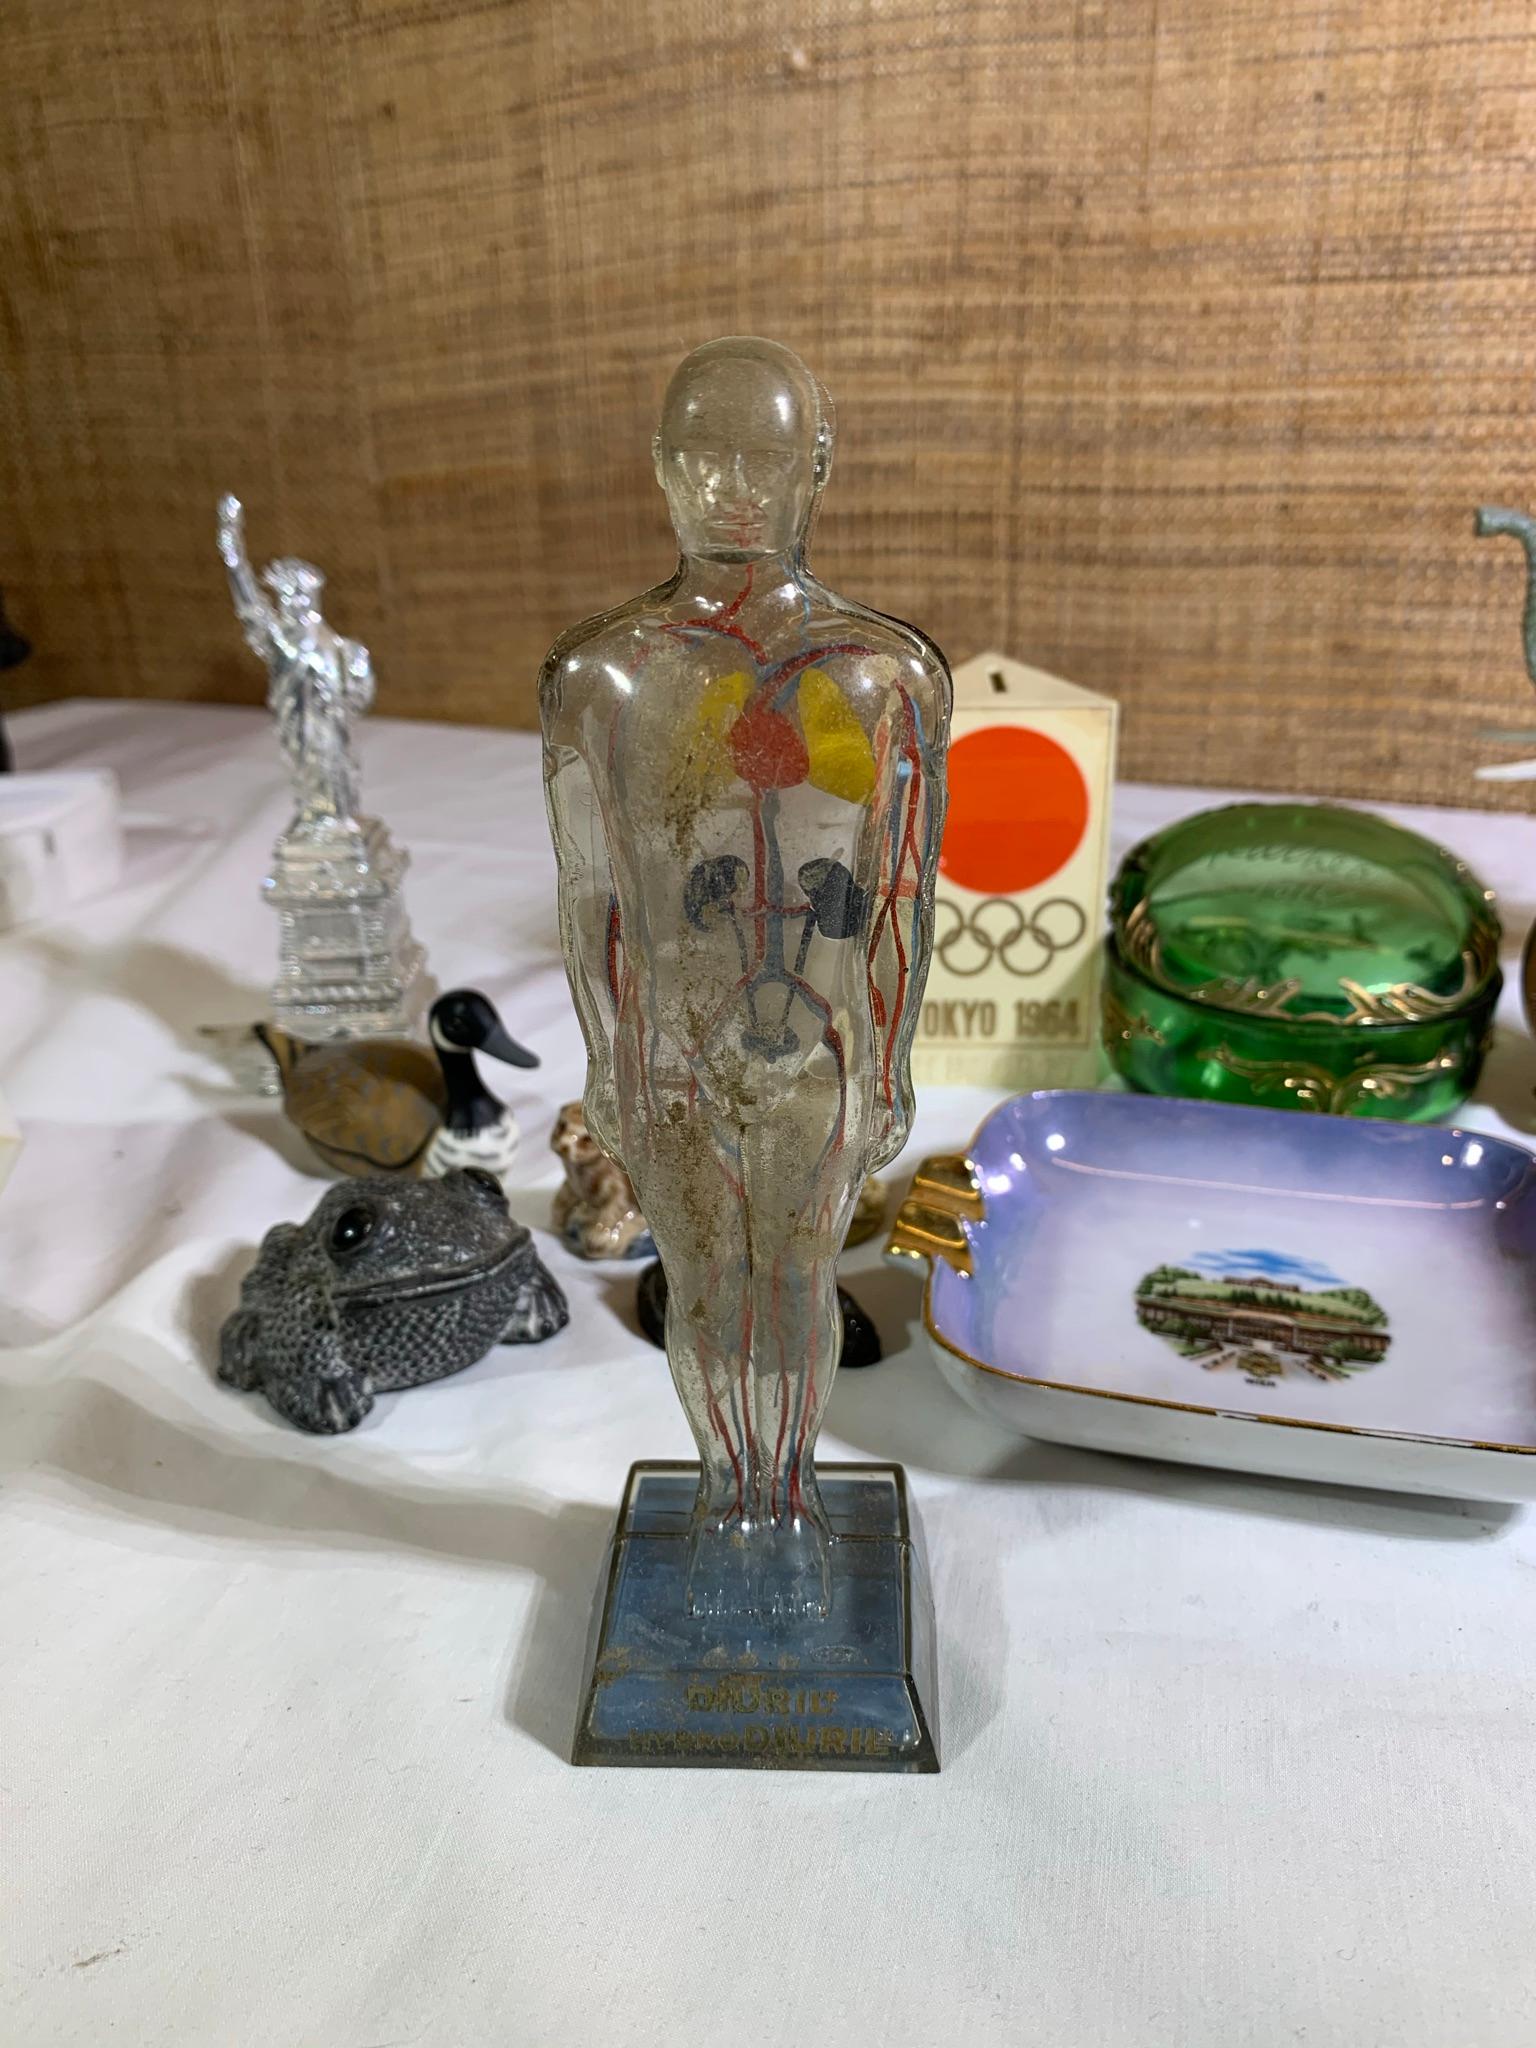 Vintage 1950s Small Clear Anatomical Model of Human Body, Eigl Ashtray,  Bank & More.